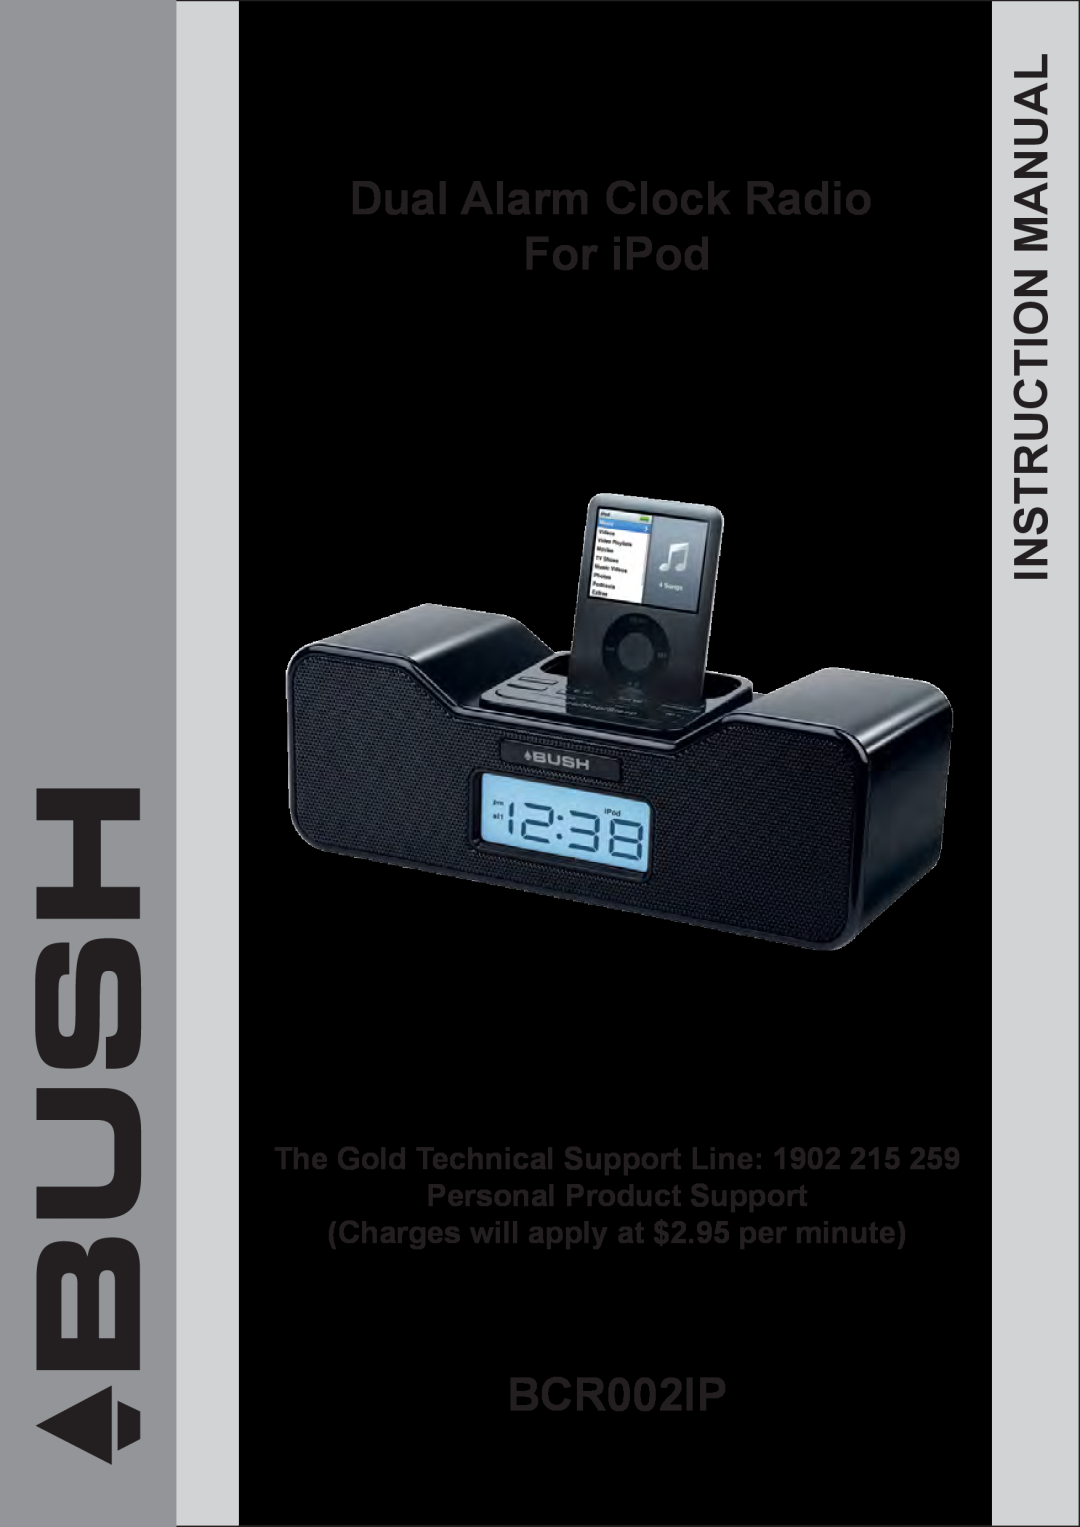 Bush BCR002IP instruction manual The Gold Technical Support Line 1902 215, Personal Product Support, Manual, For iPod 